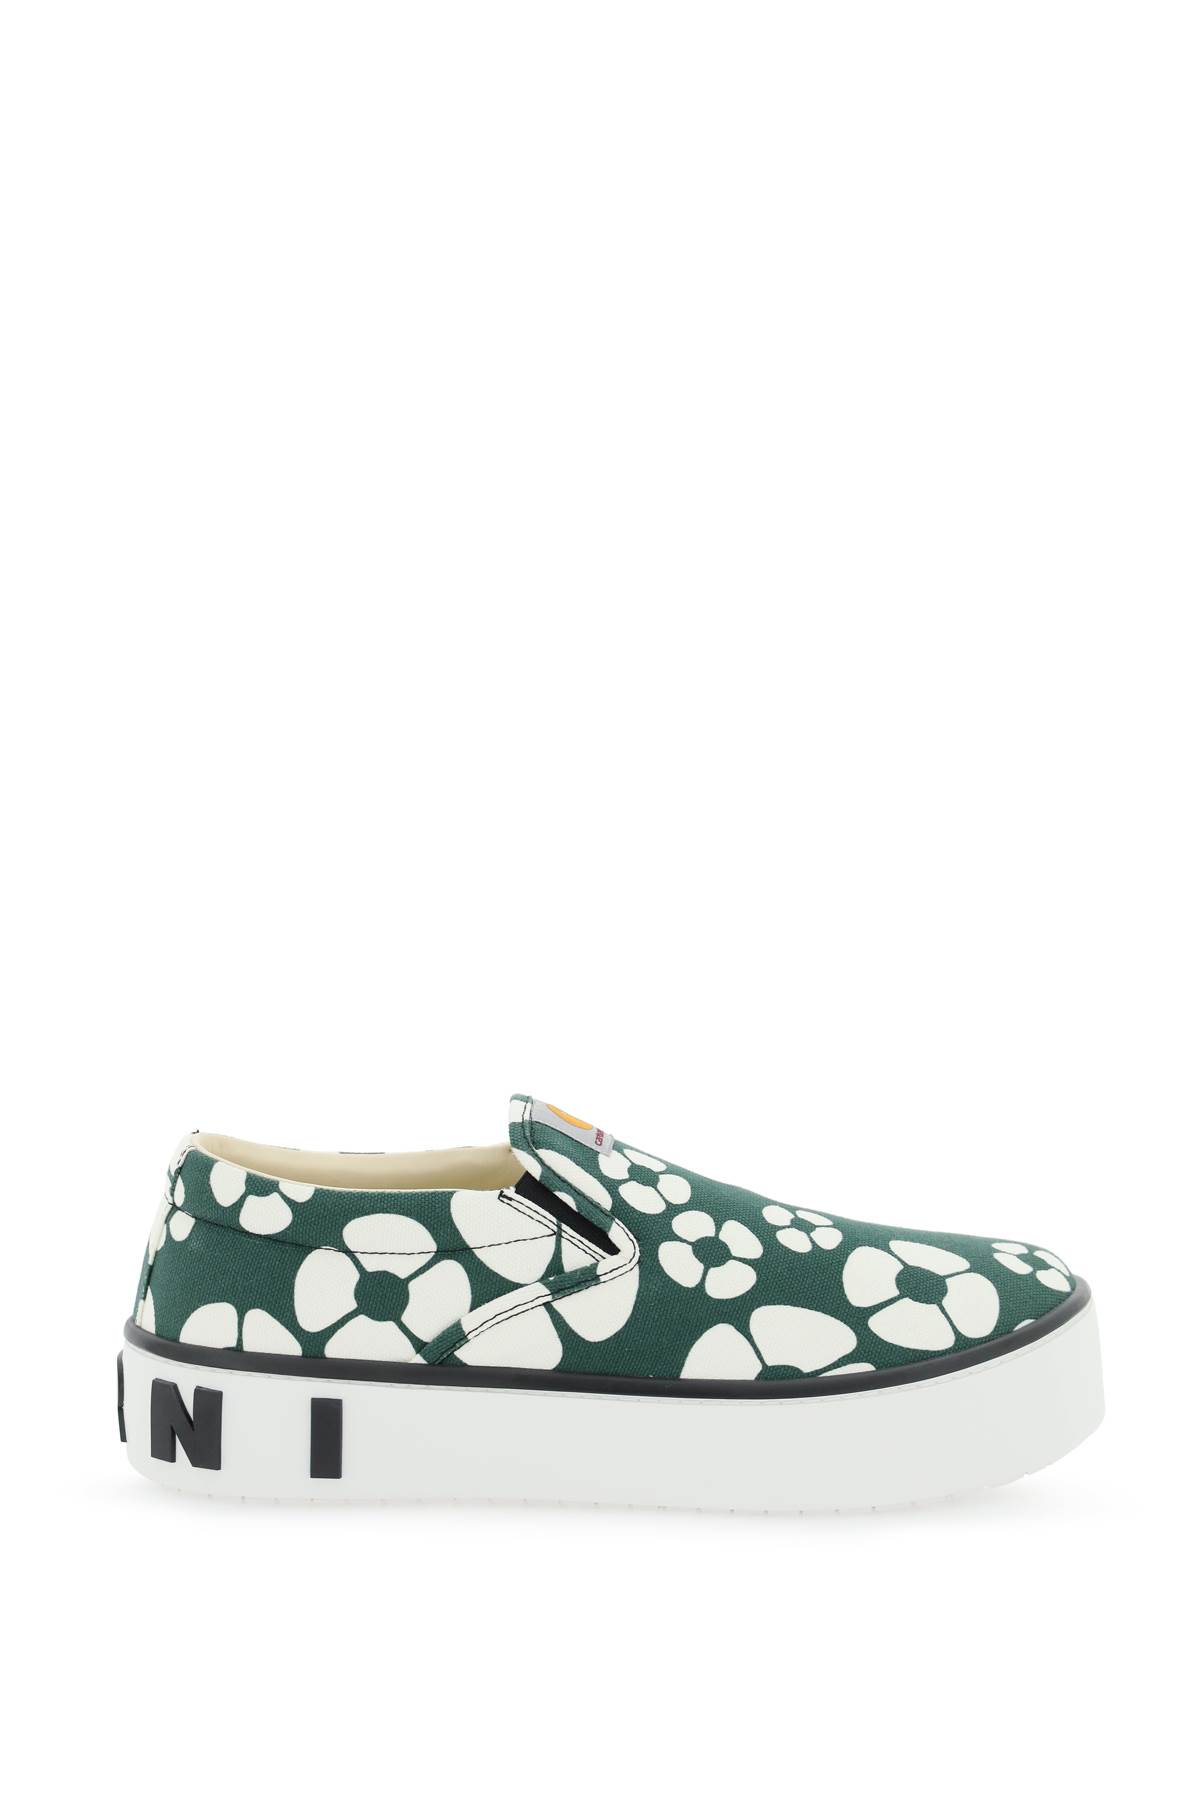 Marni Slip-on Sneakers In Forest Green Stone White (green)